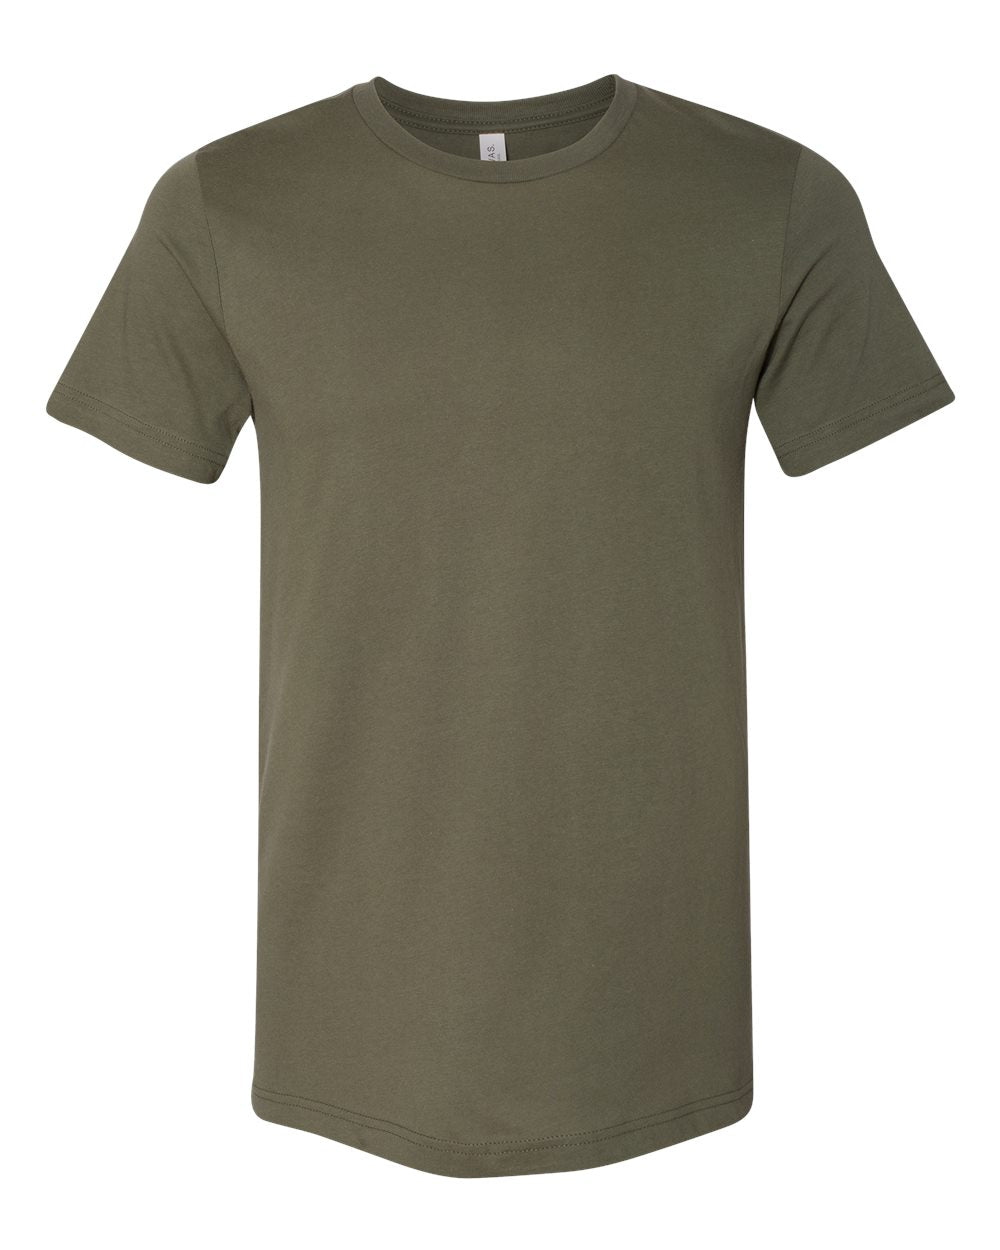 Pretreated BELLA+CANVAS 3001 Unisex Jersey Tee - Military Green